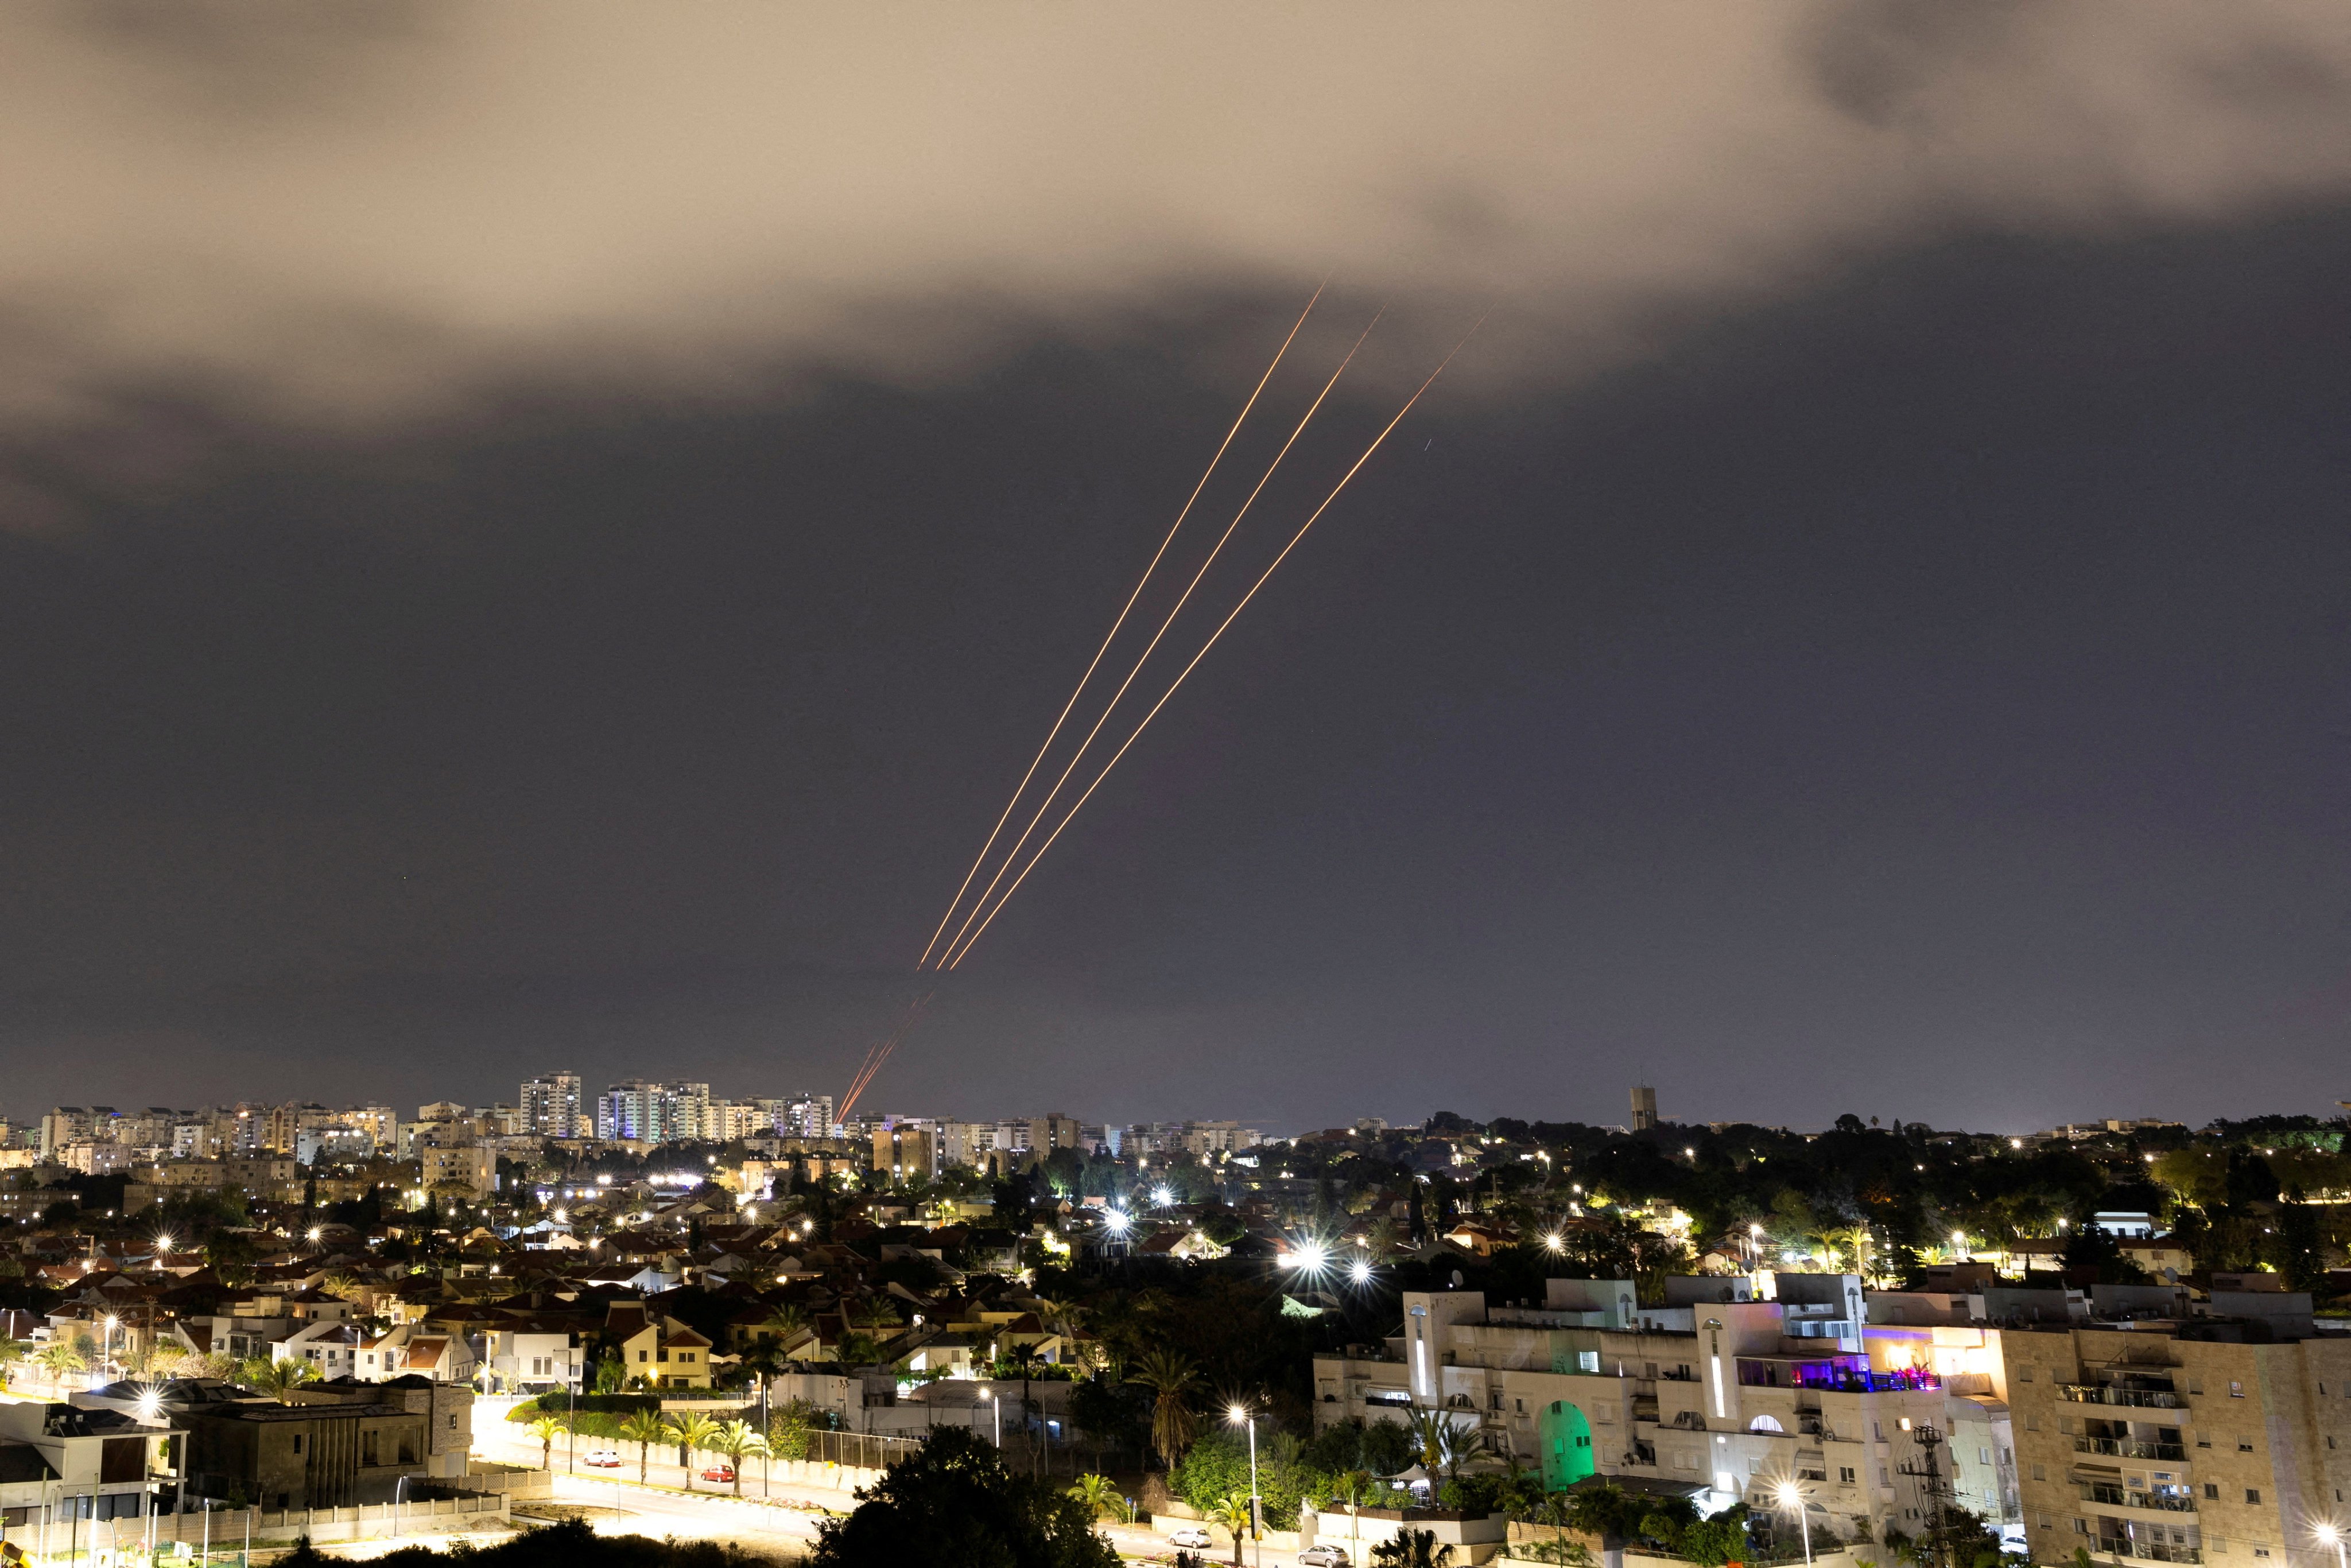 Israel’s anti-missile system responds to Iran’s drones and missiles on April 14. The cost of the 200-300 Iranian projectiles and the estimated US$50,000 price of each of the hundreds of Tamir interceptor missiles deployed add up to a multimillion-dollar bill for just one night. Photo: Reuters